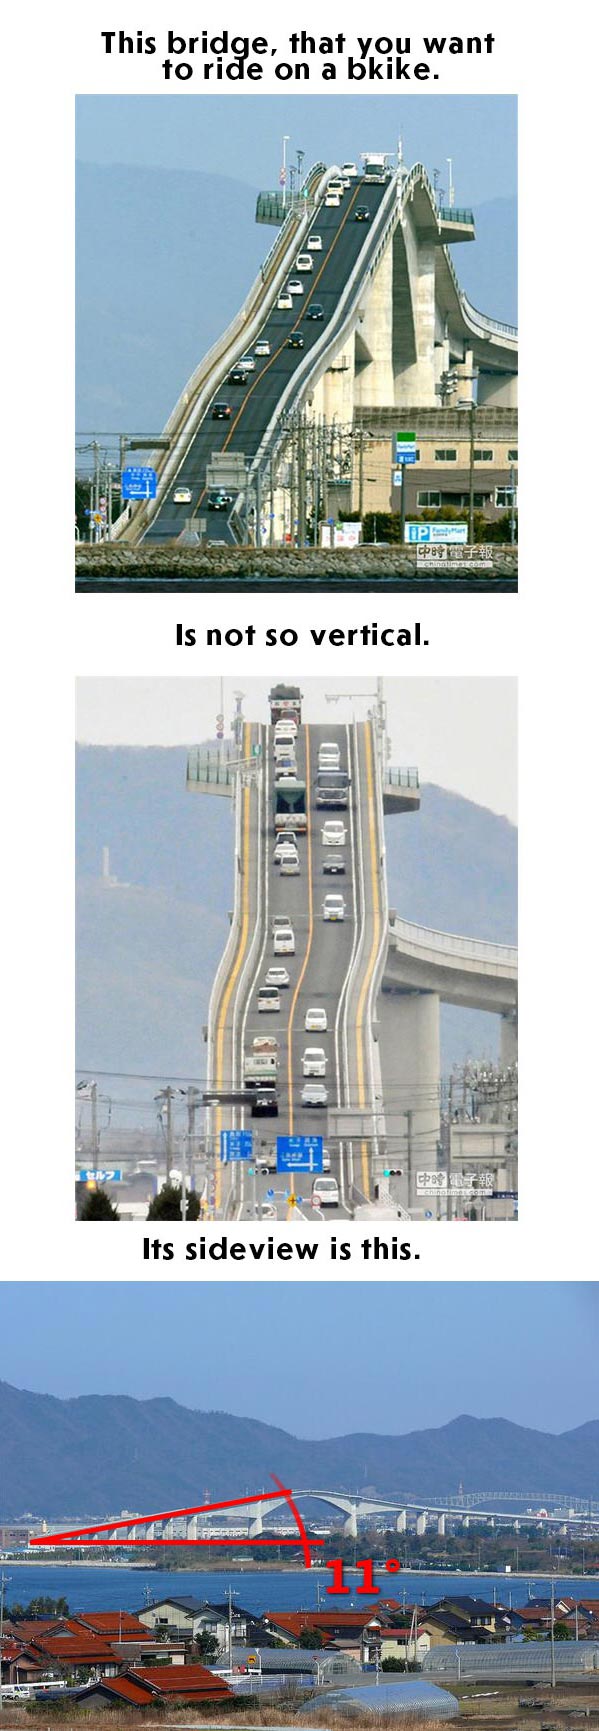 this bridge is not so vertical, the side view is this